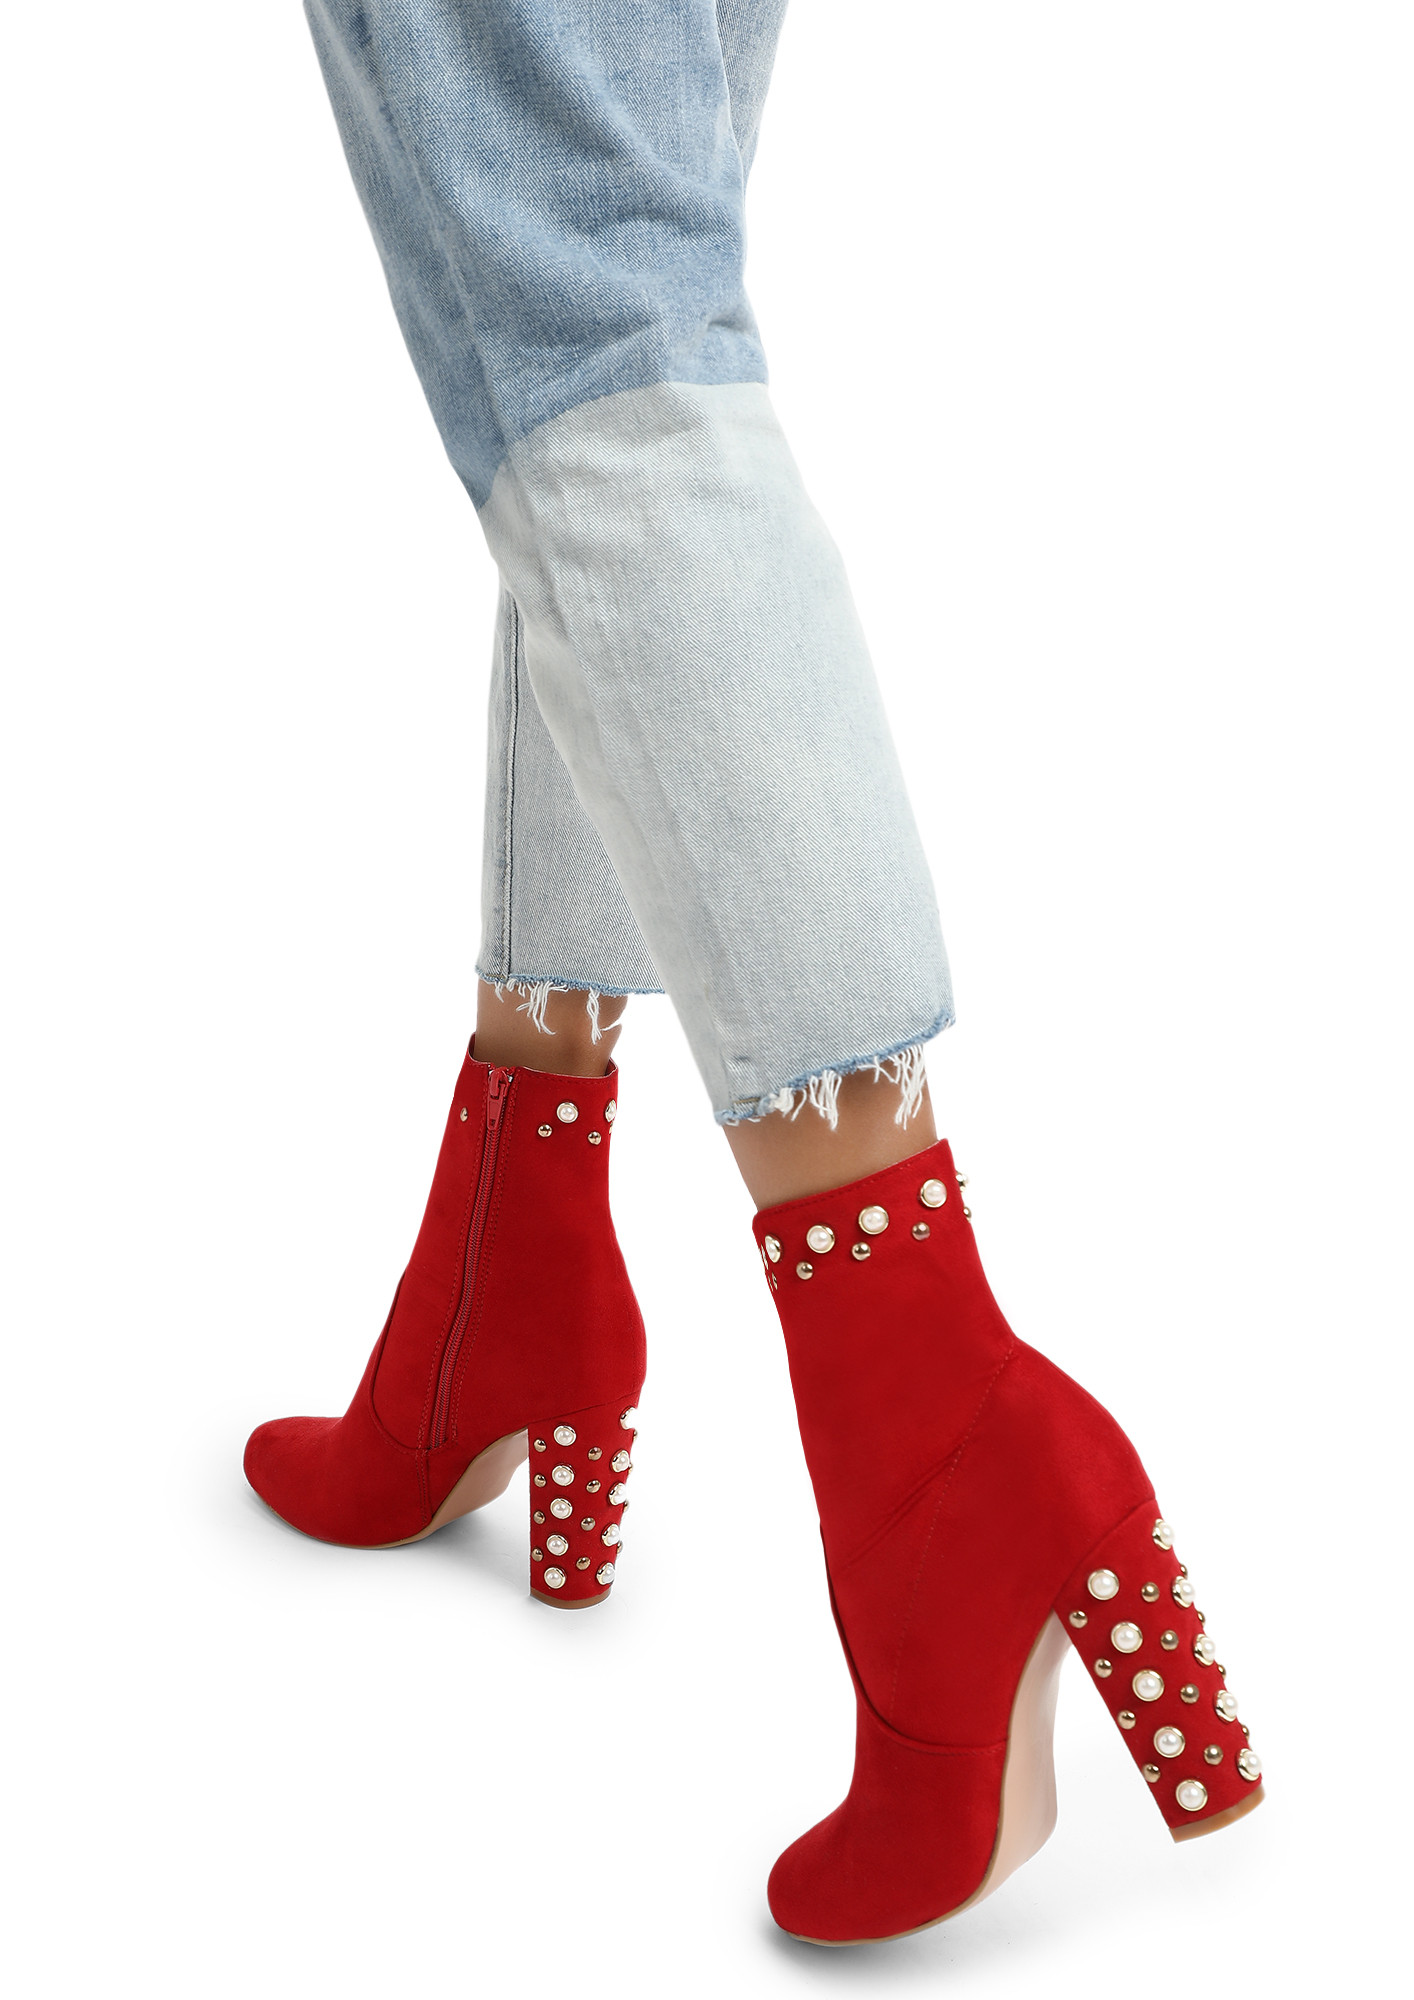 PEARL STUDDED RED ANKLE BOOTS